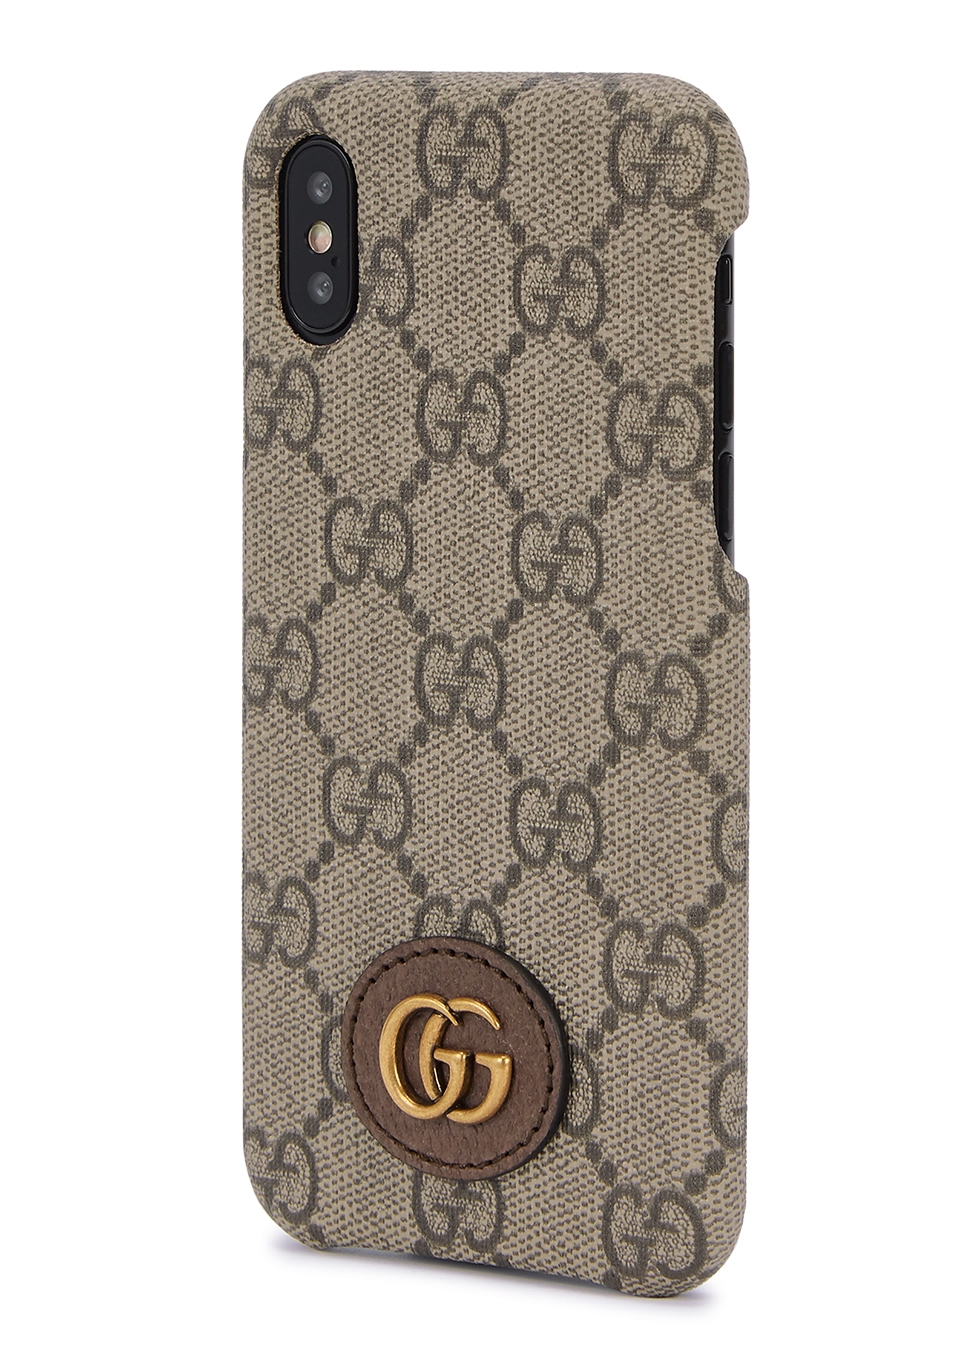 Gucci Ophidia GG monogrammed iPhone X 